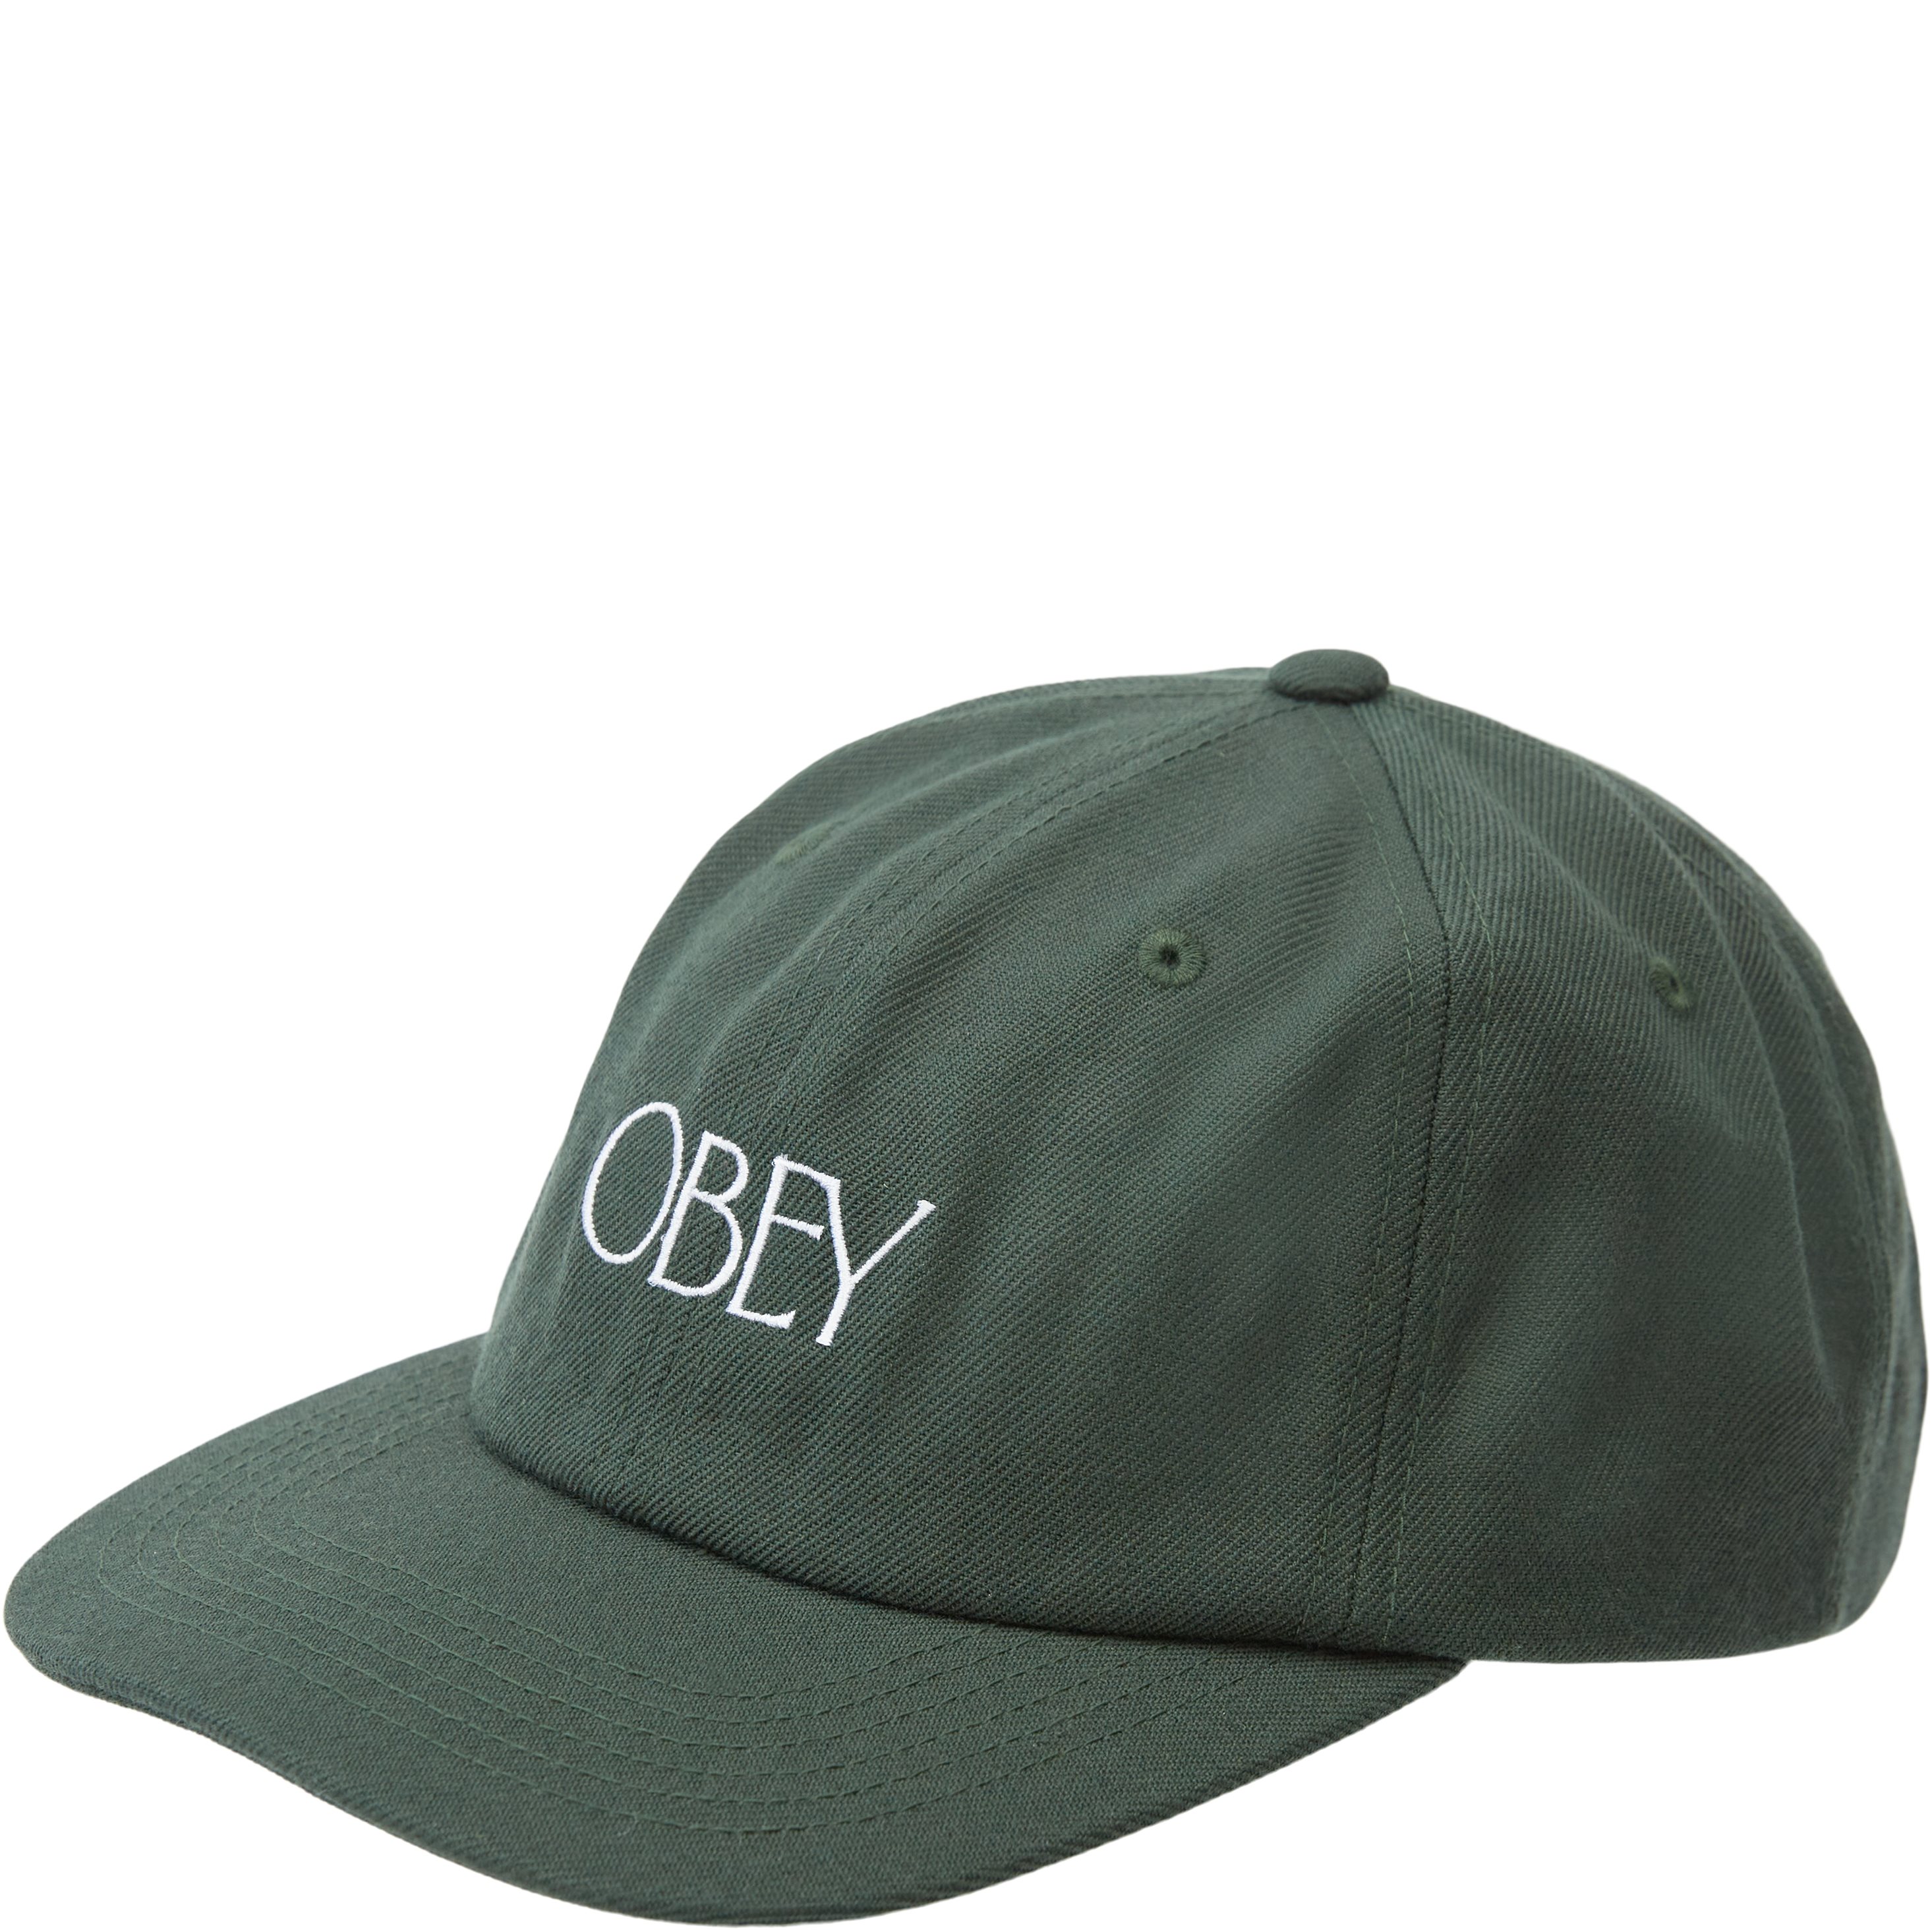 Obey Caps OBEY HEDGES 6 PANEL STRAPBACK 100580318 Green